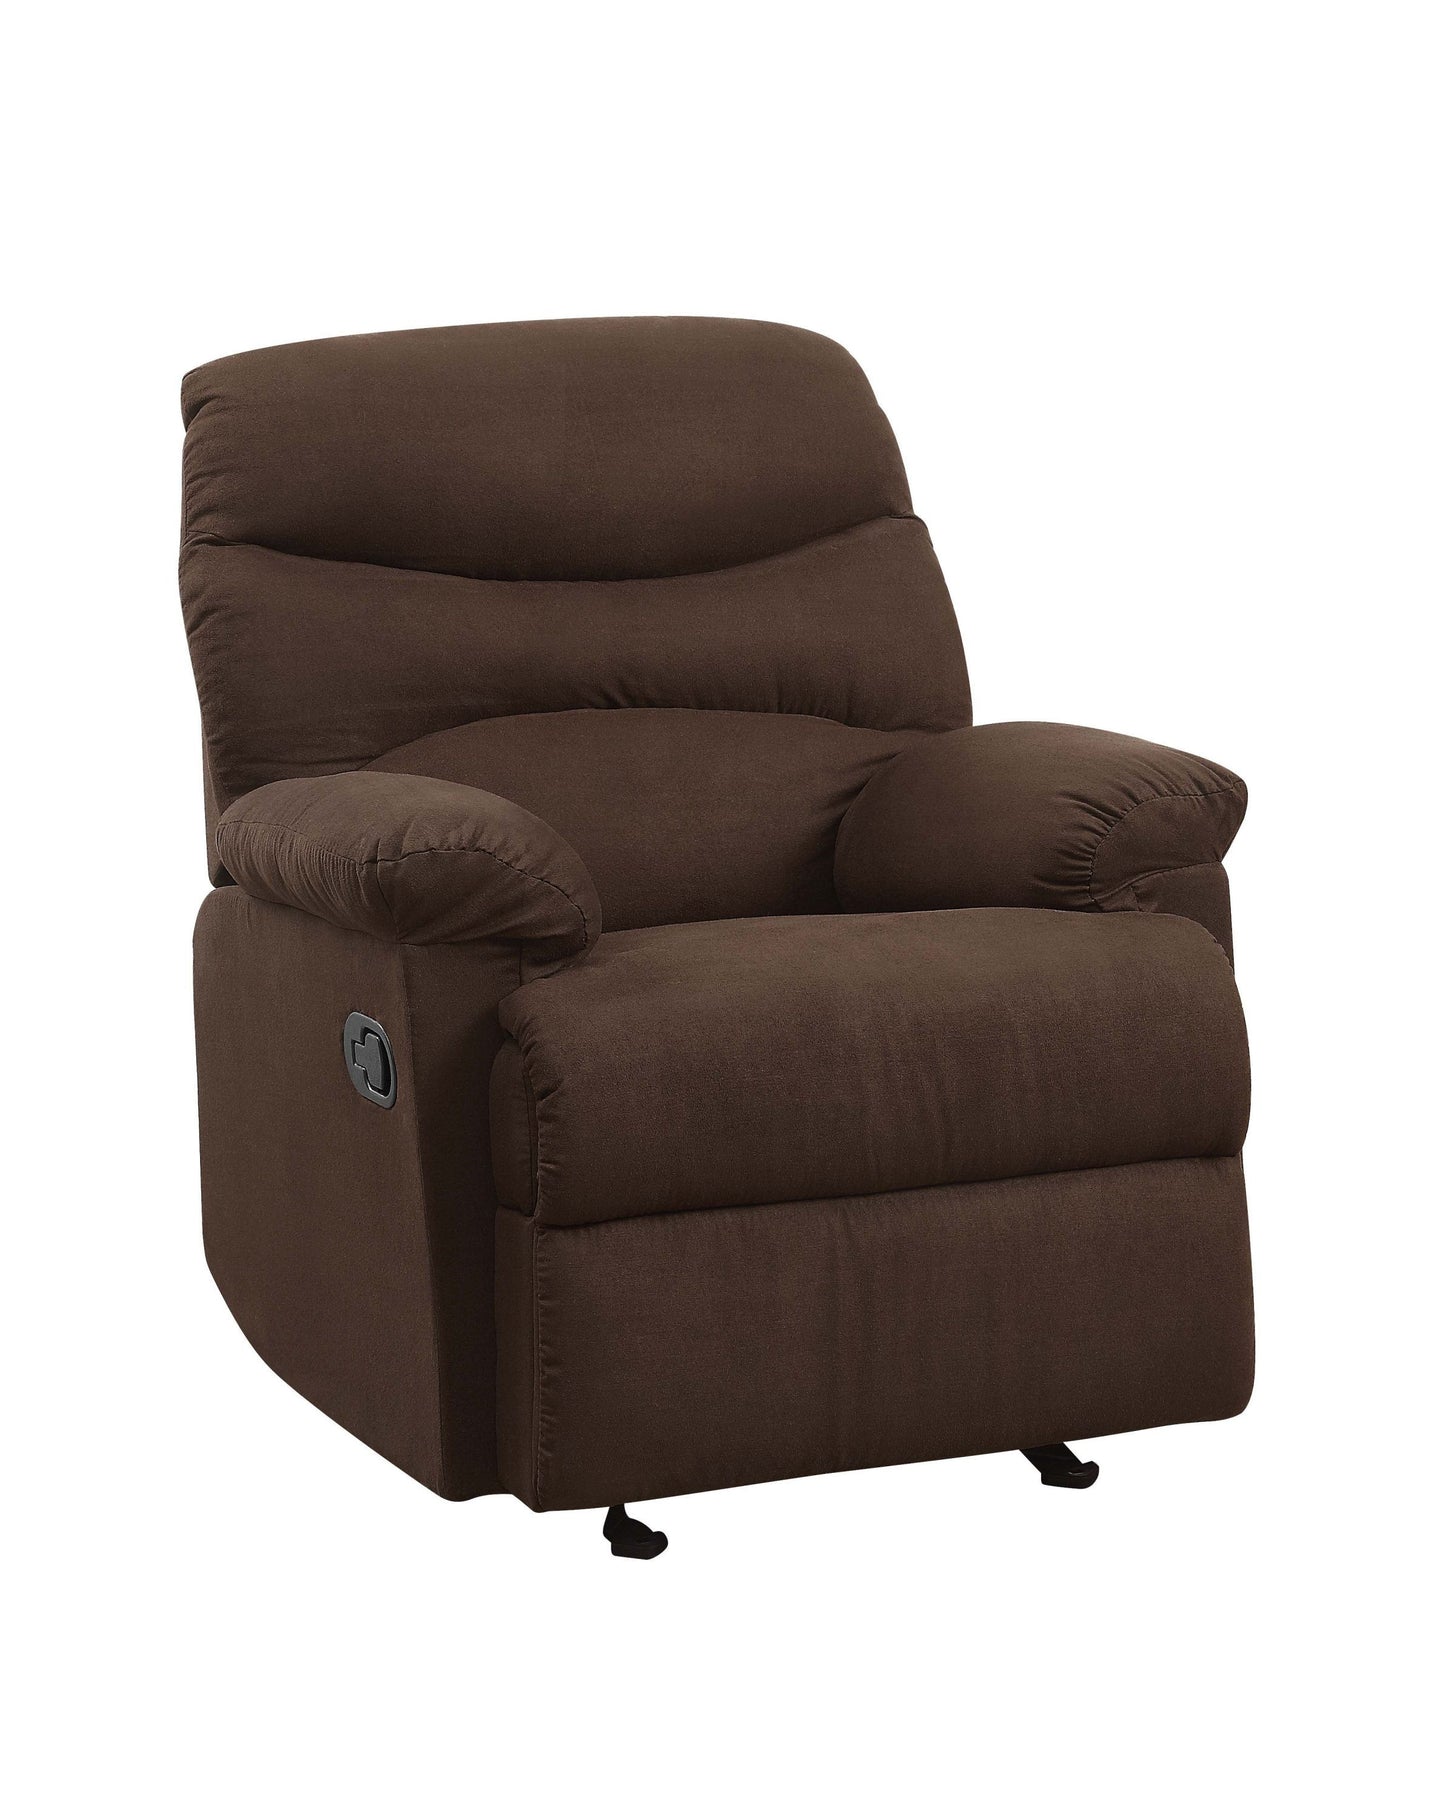 ACME Arcadia Glider Recliner (Motion) in Chocolate Microfiber